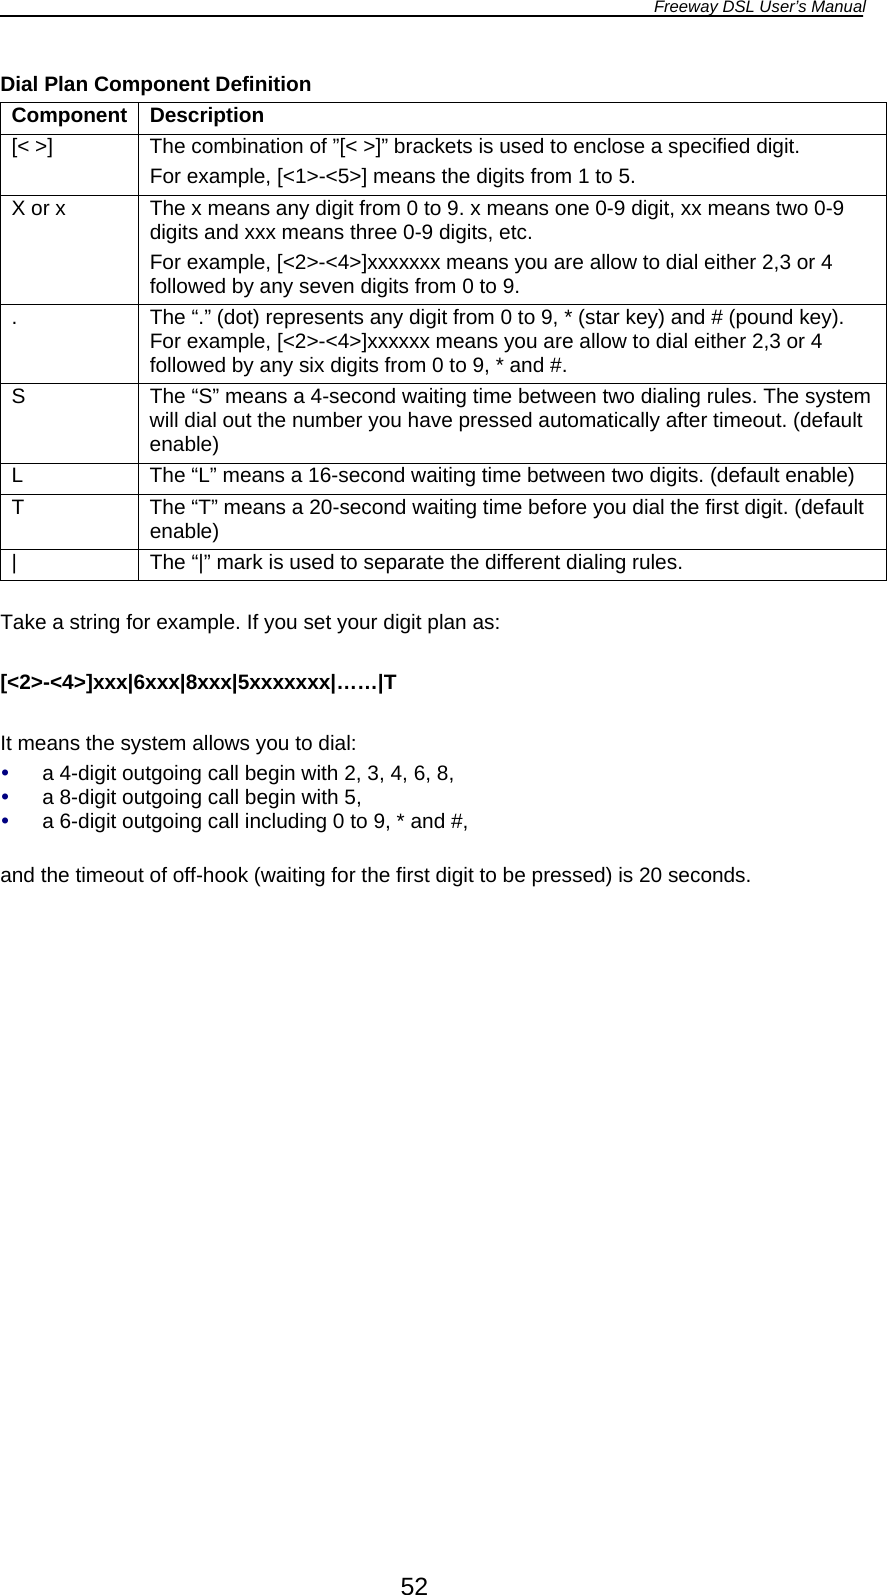 Freeway DSL User’s Manual  52 Dial Plan Component Definition Component Description [&lt; &gt;]  The combination of ”[&lt; &gt;]” brackets is used to enclose a specified digit. For example, [&lt;1&gt;-&lt;5&gt;] means the digits from 1 to 5. X or x  The x means any digit from 0 to 9. x means one 0-9 digit, xx means two 0-9 digits and xxx means three 0-9 digits, etc. For example, [&lt;2&gt;-&lt;4&gt;]xxxxxxx means you are allow to dial either 2,3 or 4 followed by any seven digits from 0 to 9. .  The “.” (dot) represents any digit from 0 to 9, * (star key) and # (pound key). For example, [&lt;2&gt;-&lt;4&gt;]xxxxxx means you are allow to dial either 2,3 or 4 followed by any six digits from 0 to 9, * and #. S  The “S” means a 4-second waiting time between two dialing rules. The system will dial out the number you have pressed automatically after timeout. (default enable) L  The “L” means a 16-second waiting time between two digits. (default enable) T  The “T” means a 20-second waiting time before you dial the first digit. (default enable) |  The “|” mark is used to separate the different dialing rules.  Take a string for example. If you set your digit plan as:  [&lt;2&gt;-&lt;4&gt;]xxx|6xxx|8xxx|5xxxxxxx|……|T  It means the system allows you to dial: y a 4-digit outgoing call begin with 2, 3, 4, 6, 8, y a 8-digit outgoing call begin with 5, y a 6-digit outgoing call including 0 to 9, * and #,  and the timeout of off-hook (waiting for the first digit to be pressed) is 20 seconds.   